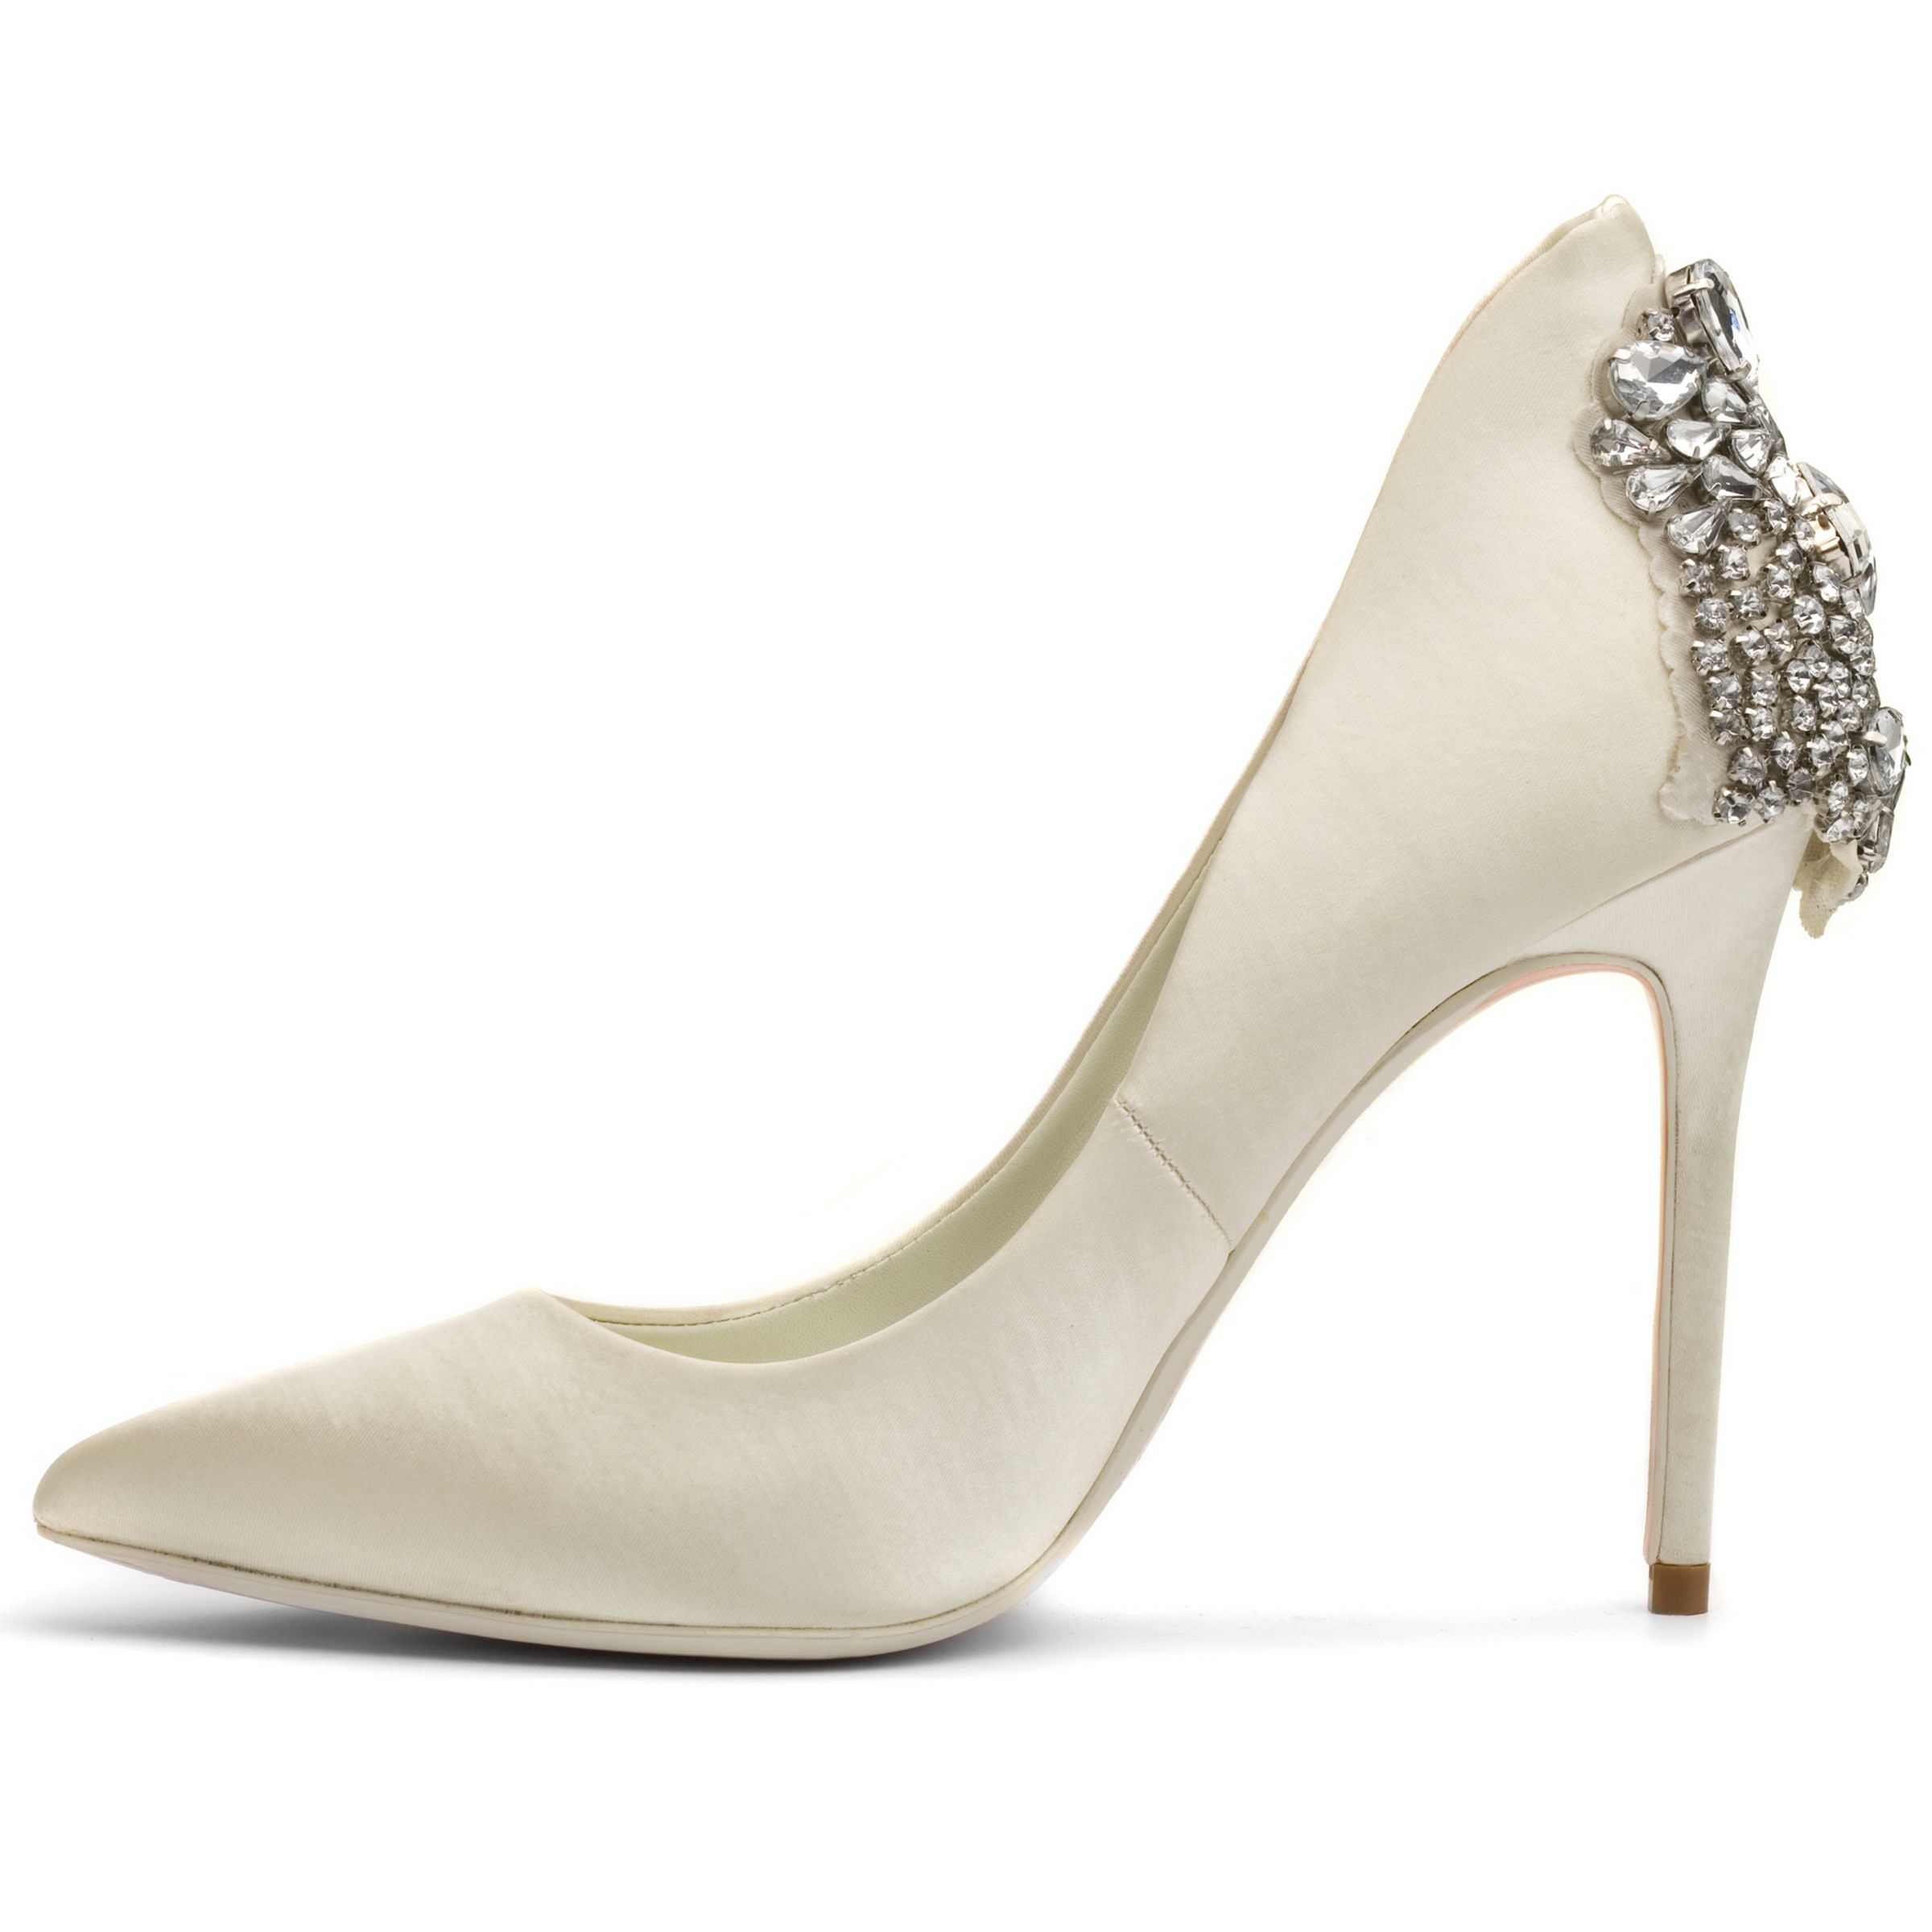 Ted Baker Mieon Embellished Court Shoes at John Lewis Partners